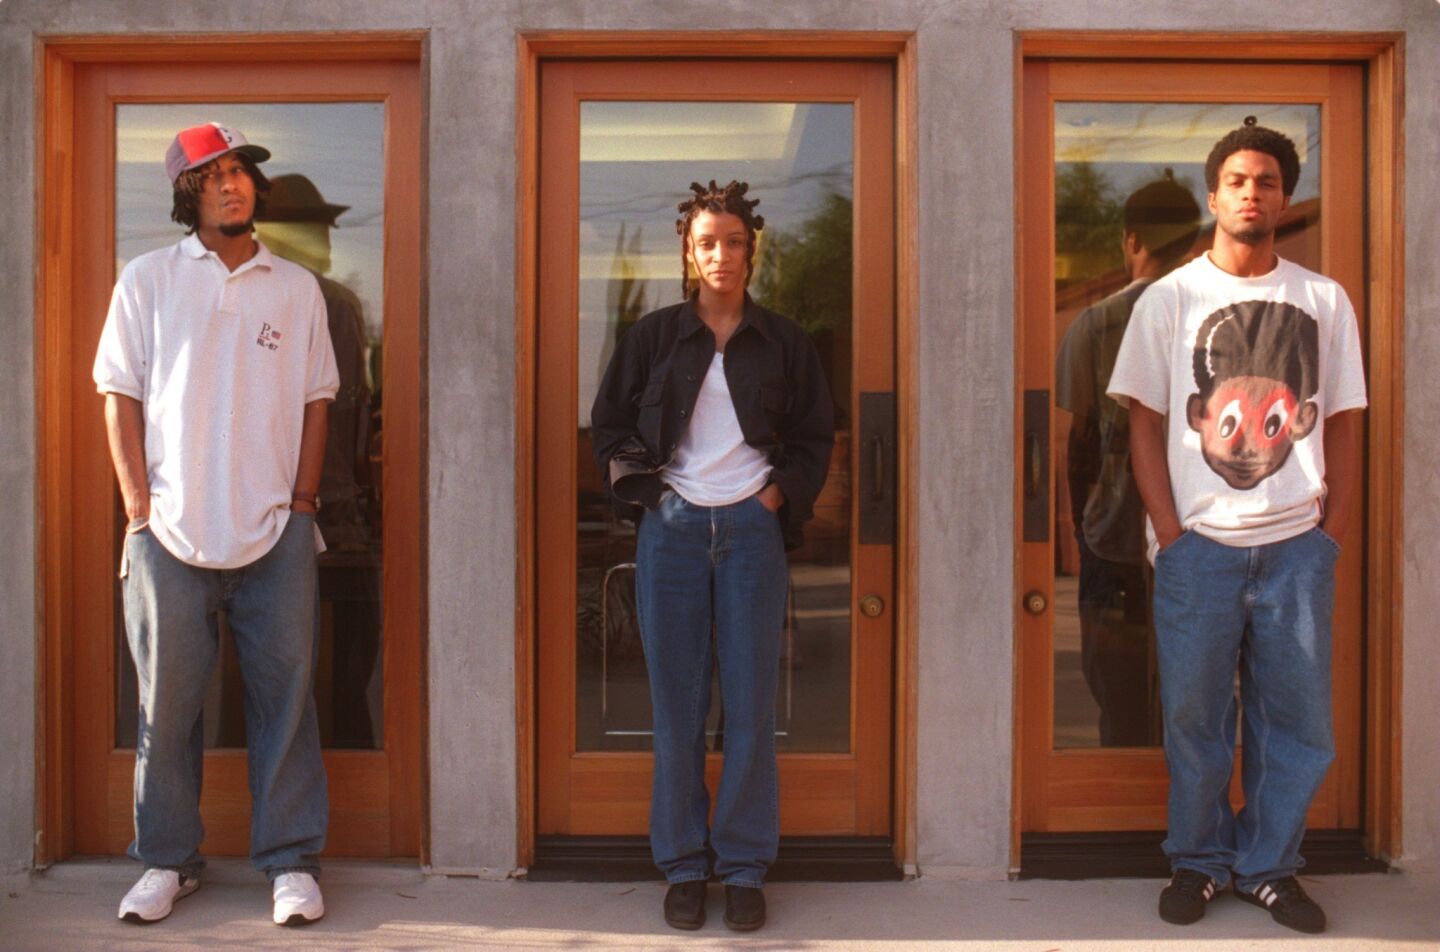 UNDERRATED: Digable Planets' "Blowout Comb"